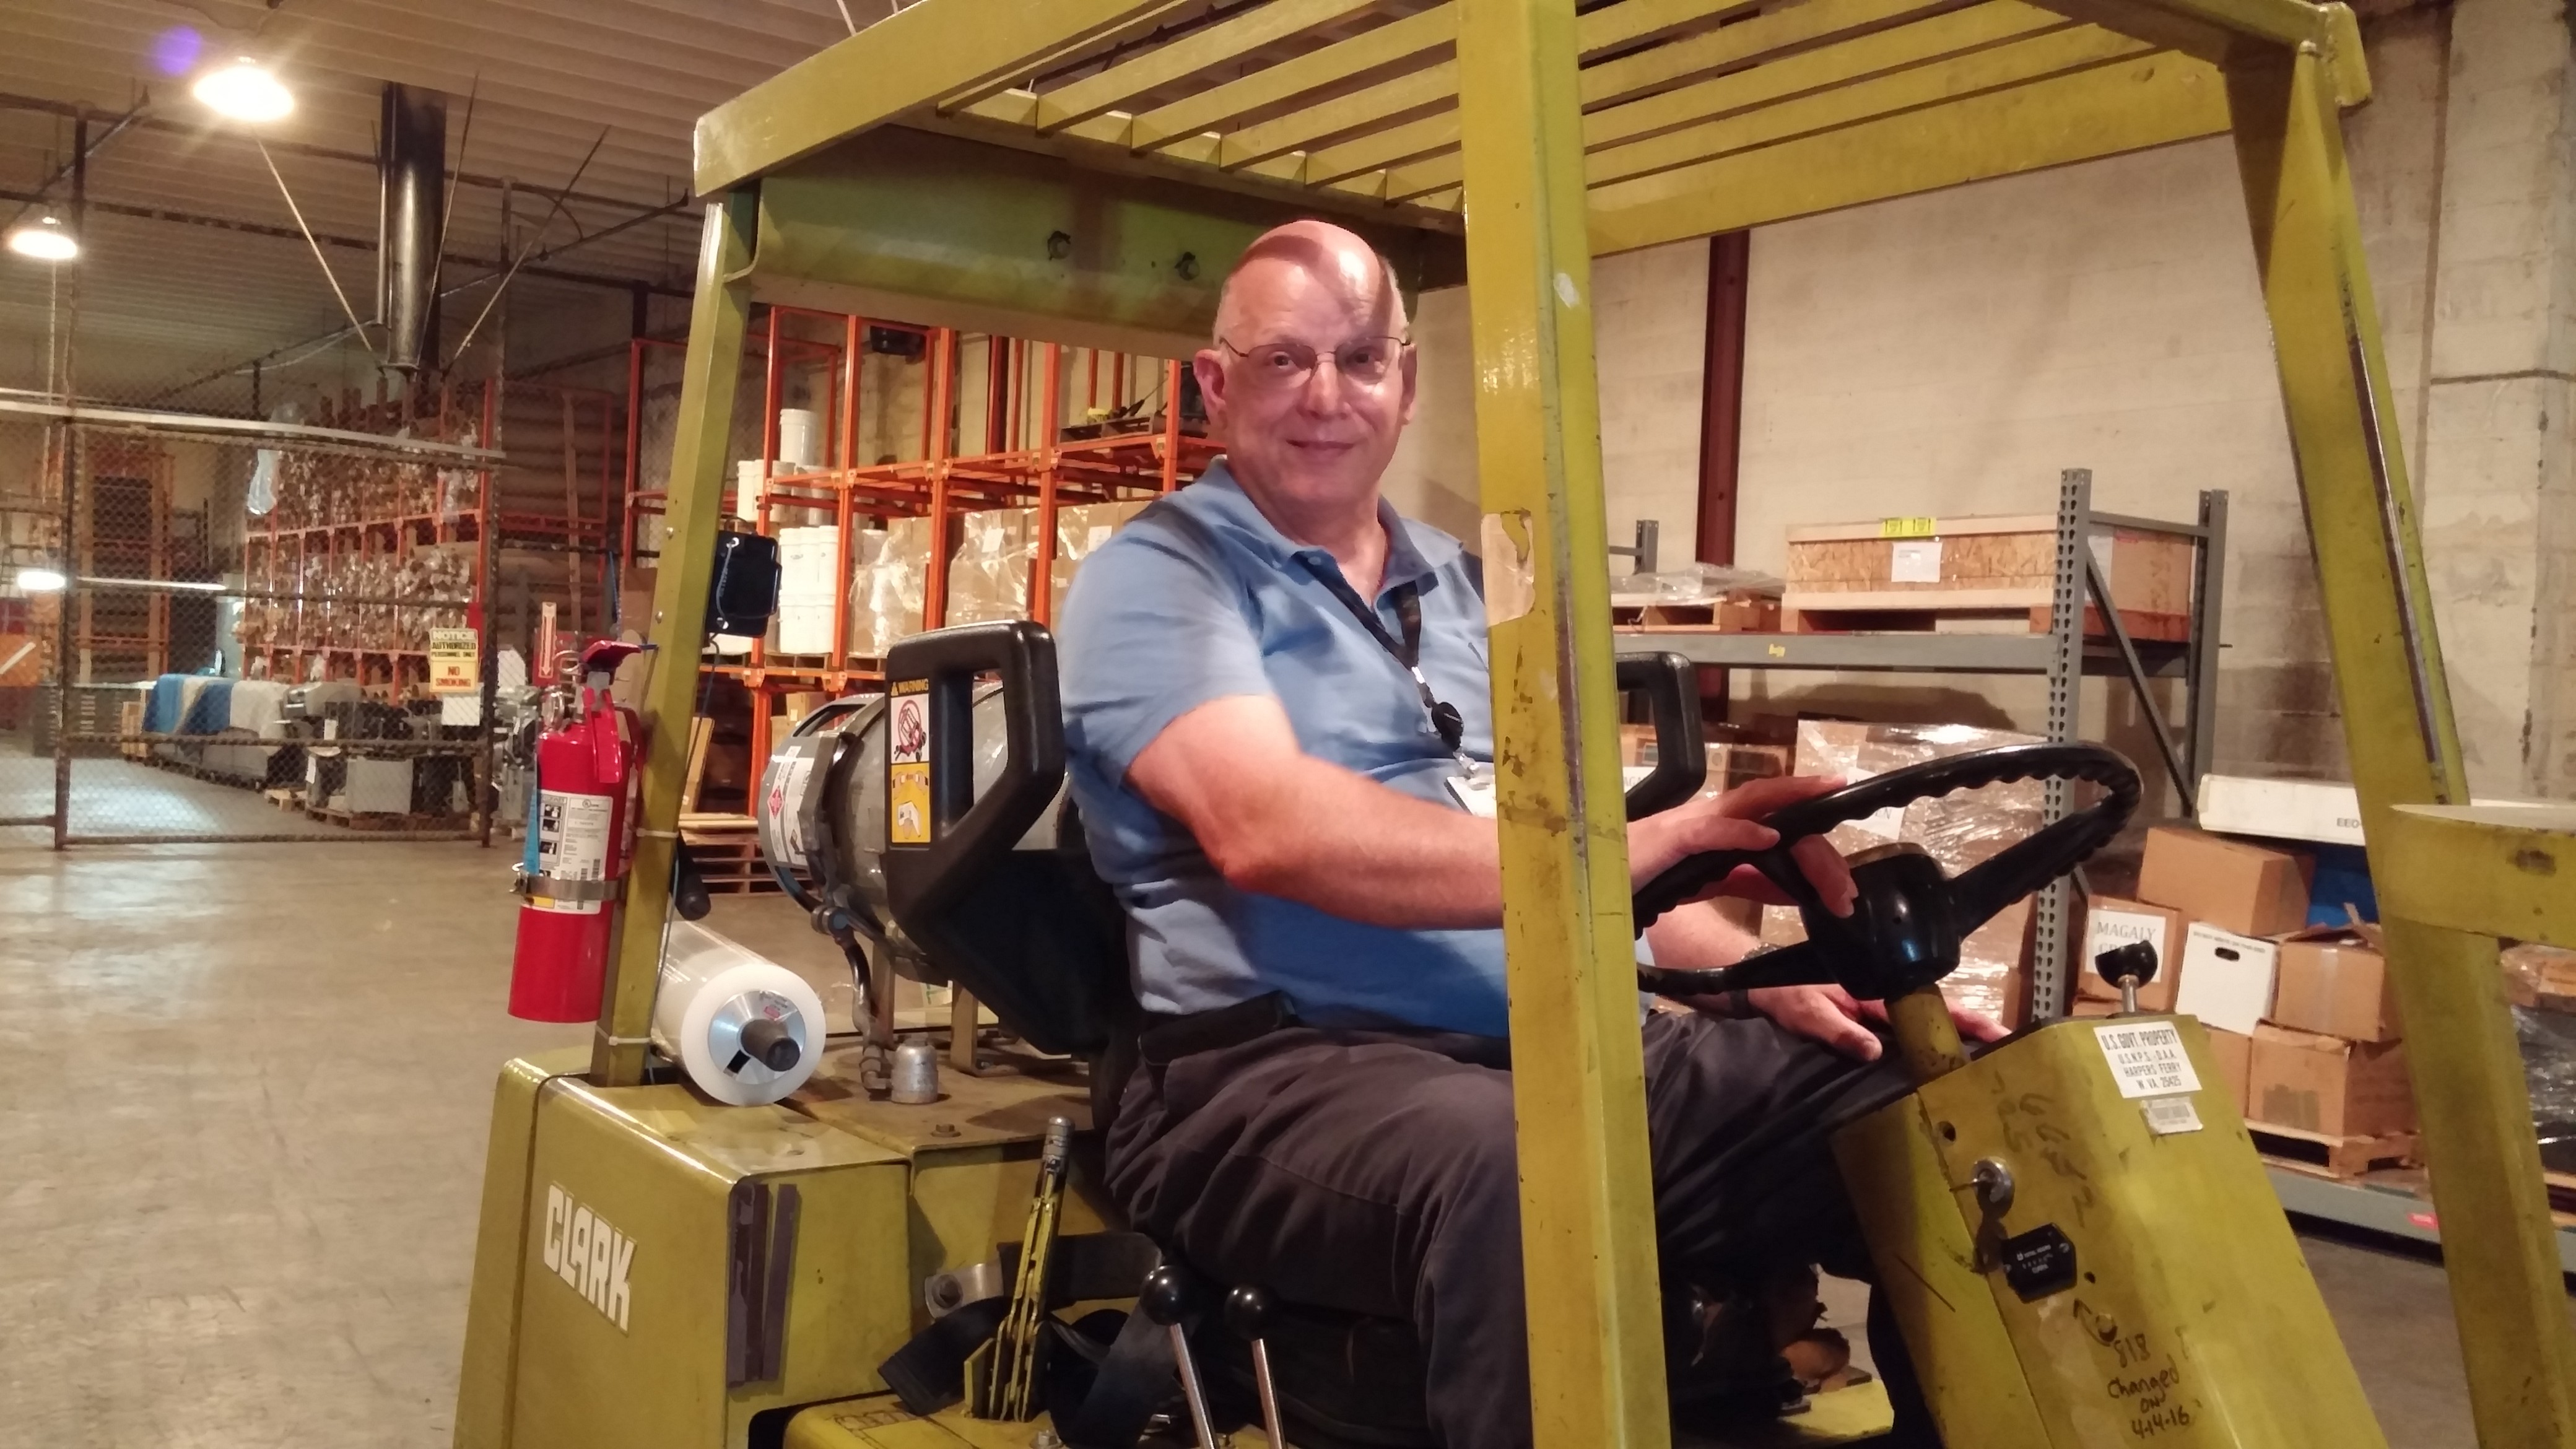 Harpers Ferry Forklift1 e1468251592717 - Goodwill Does What!?!? - Harpers Ferry